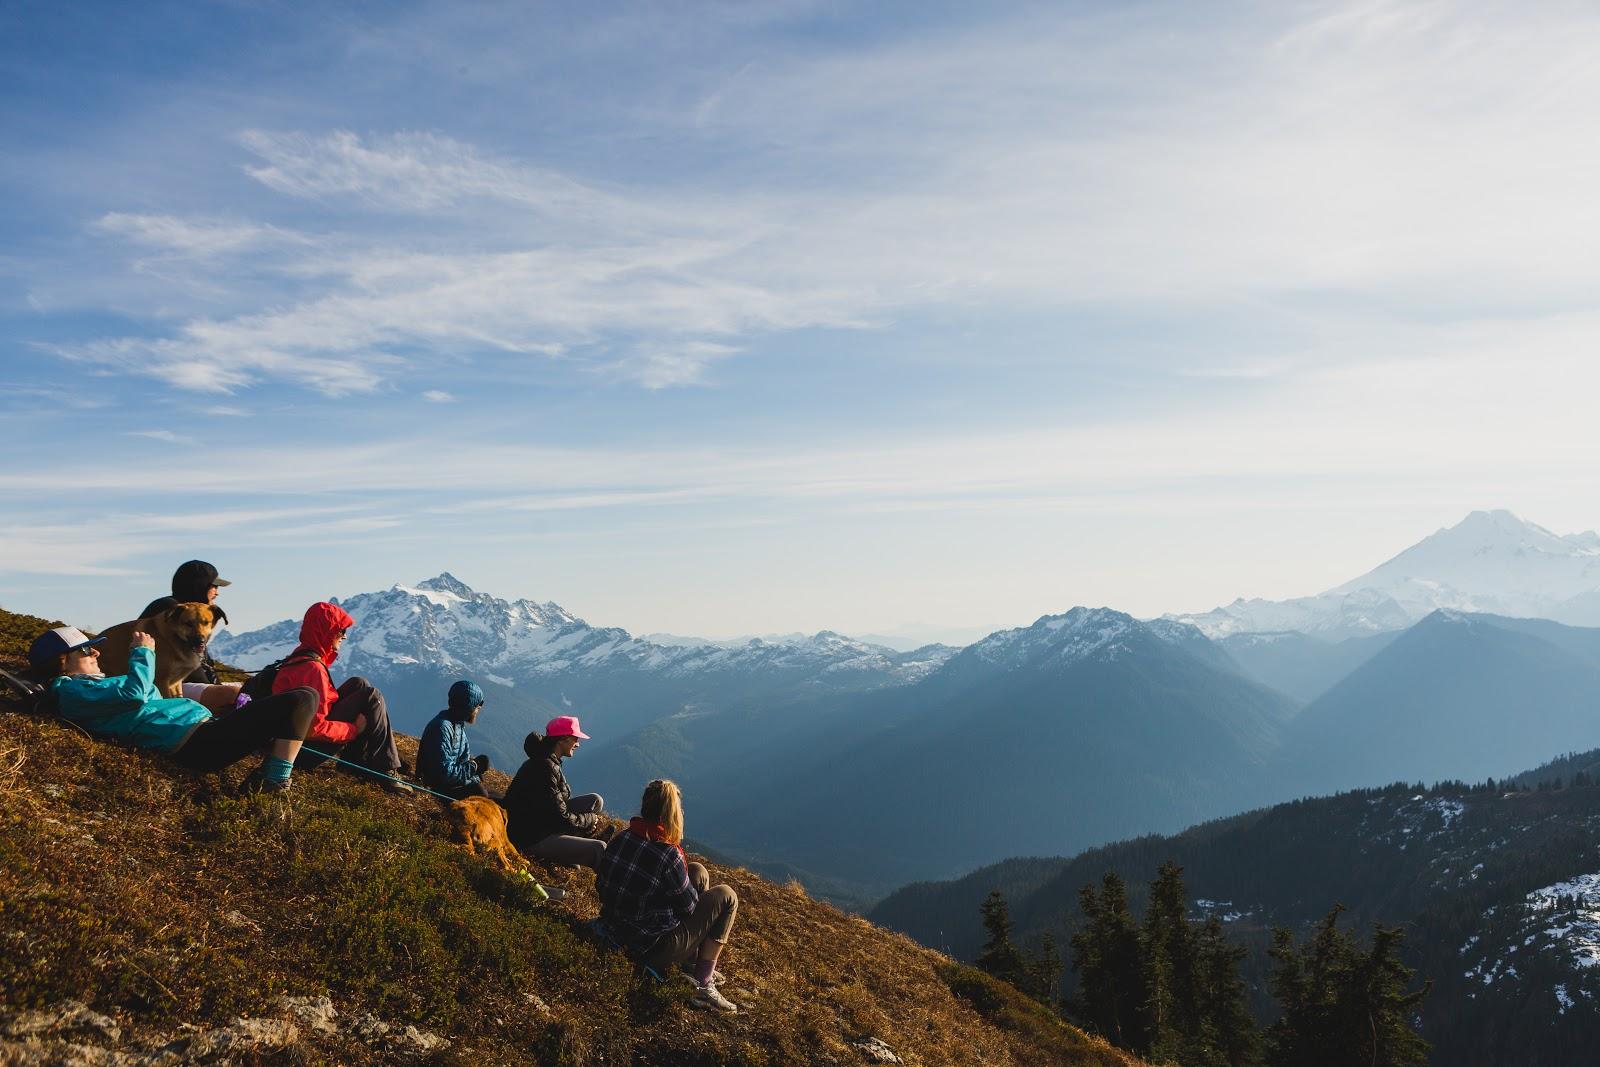 Students relax on a hill and take in a view of a mountain range